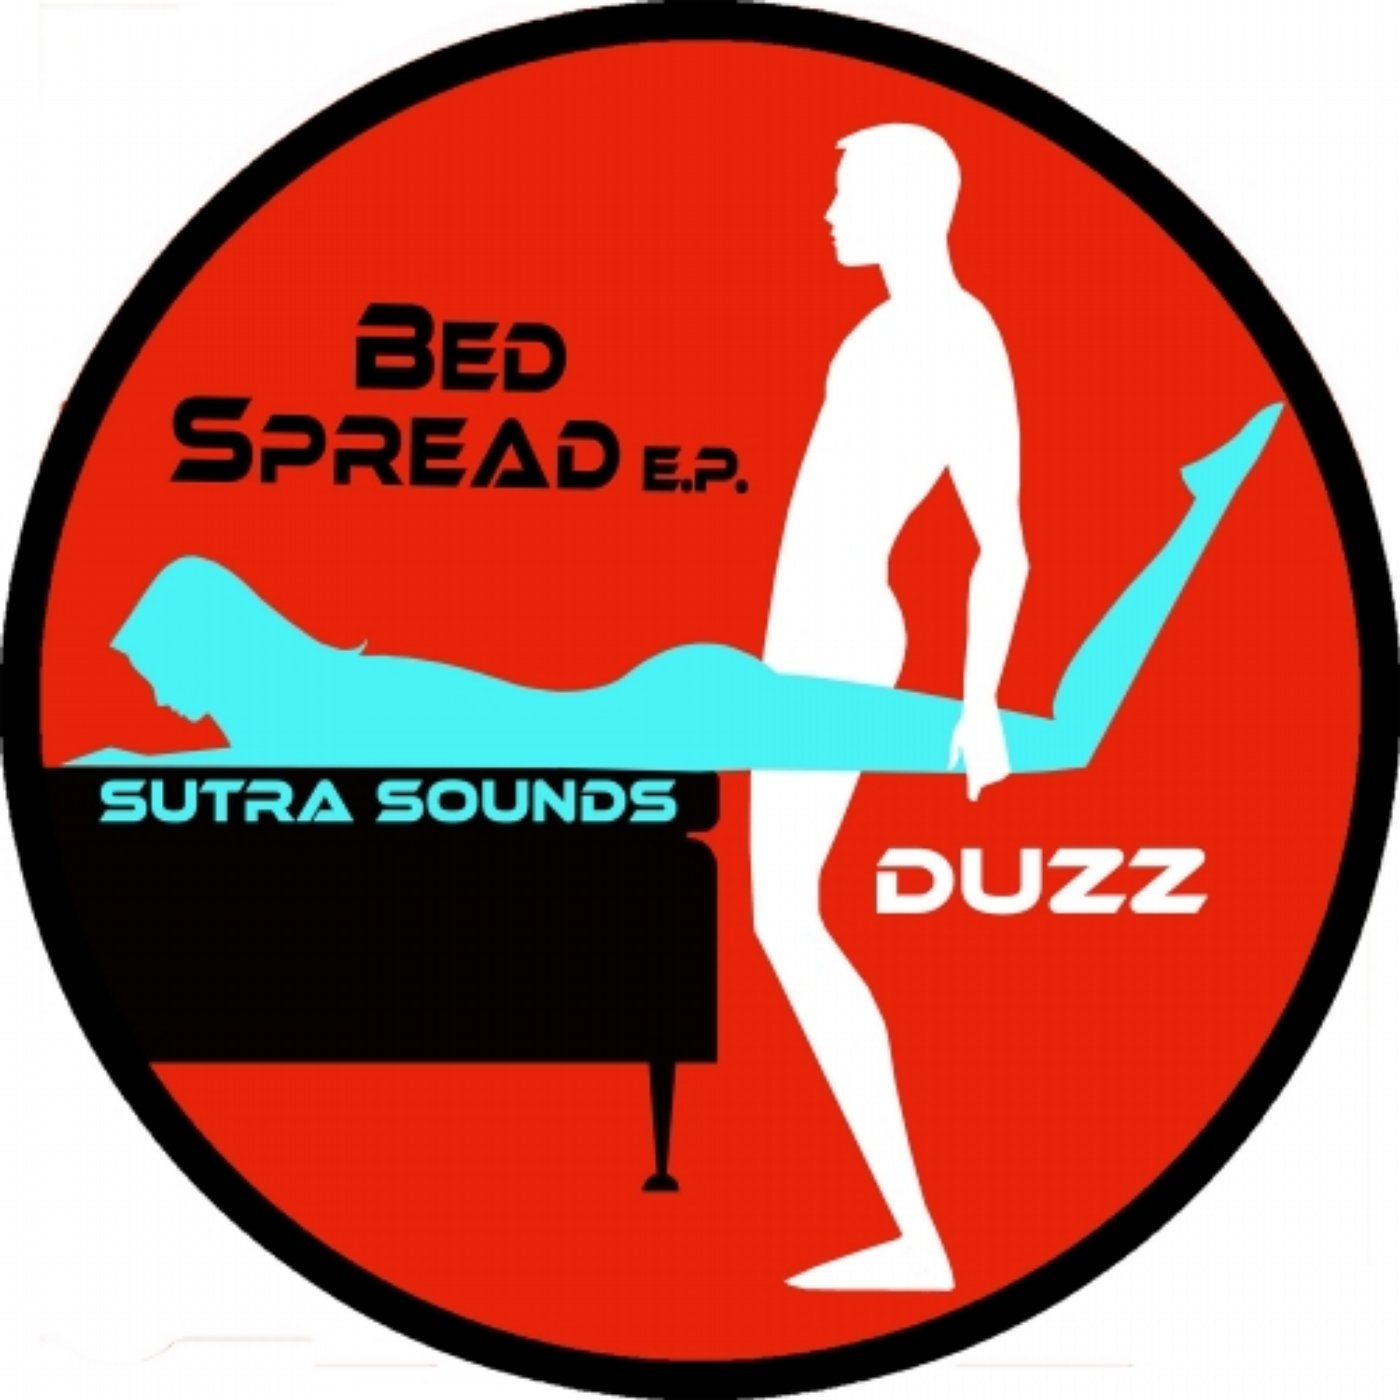 Bed Spread EP